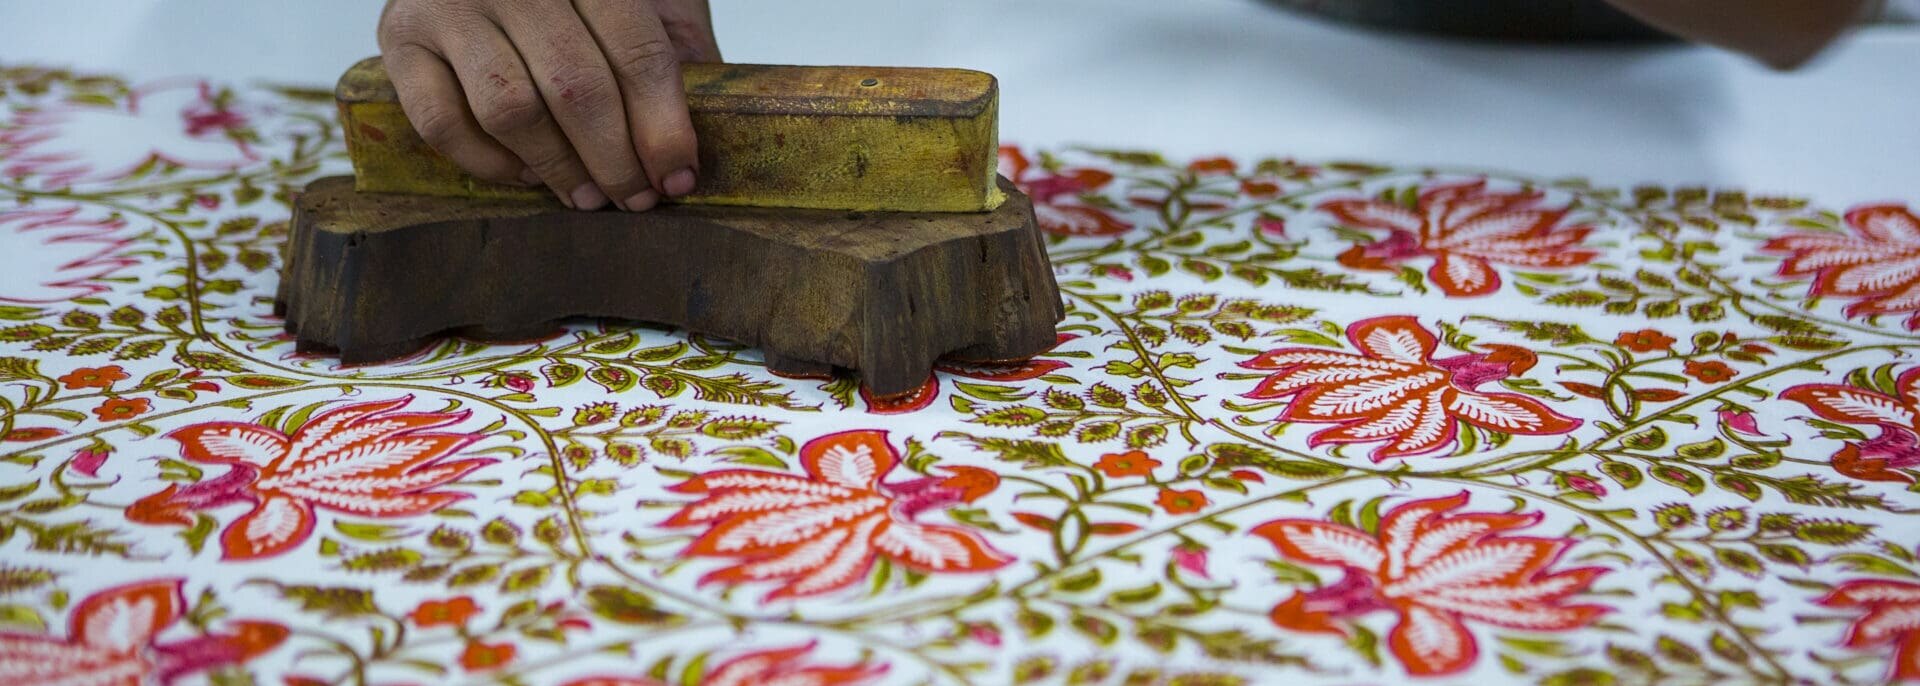 Man holds a carved wooden block and stamps red flowers onto a cotton cloth.